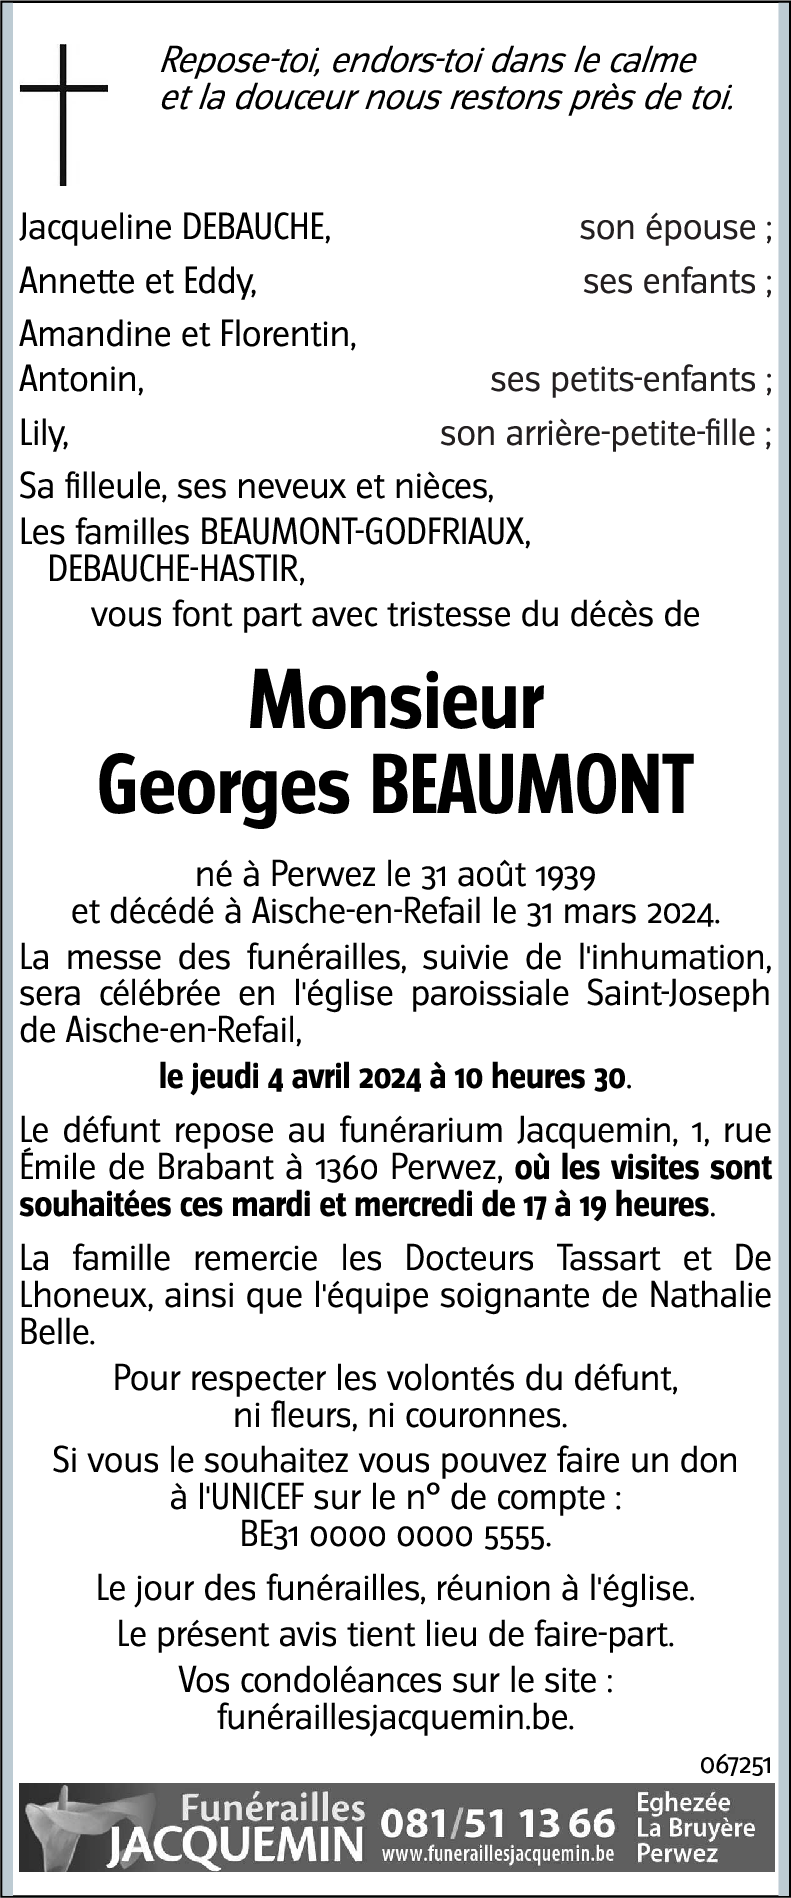 Georges Beaumont